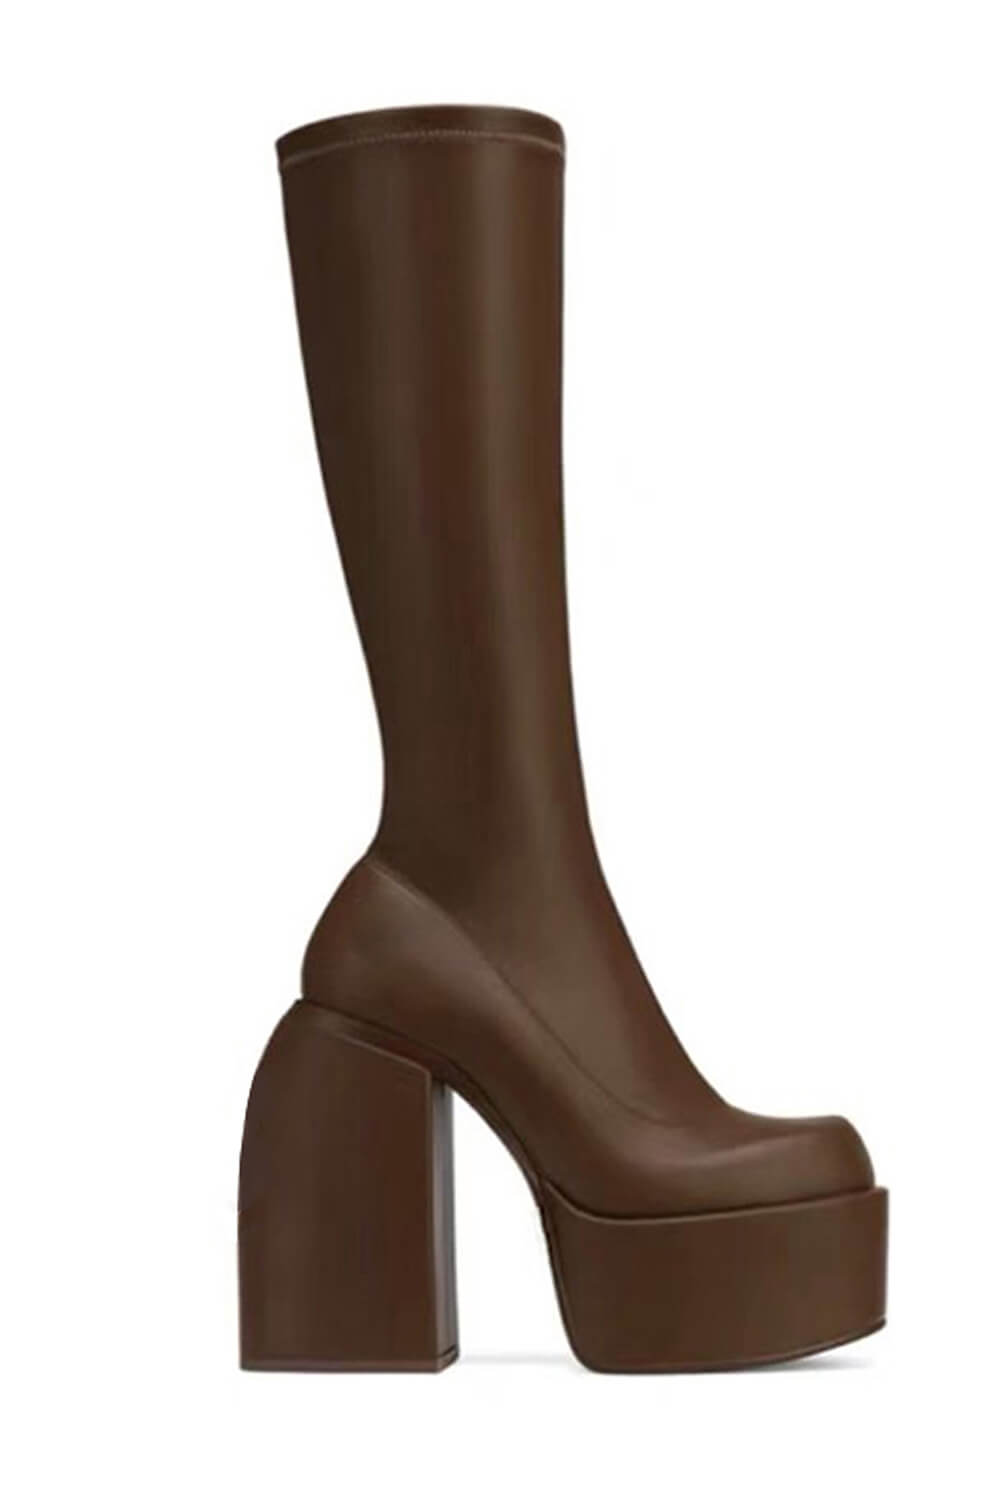 Faux Leather Closed Round Toe Chunky Platform Block Heel Knee High Boot - Chocolate